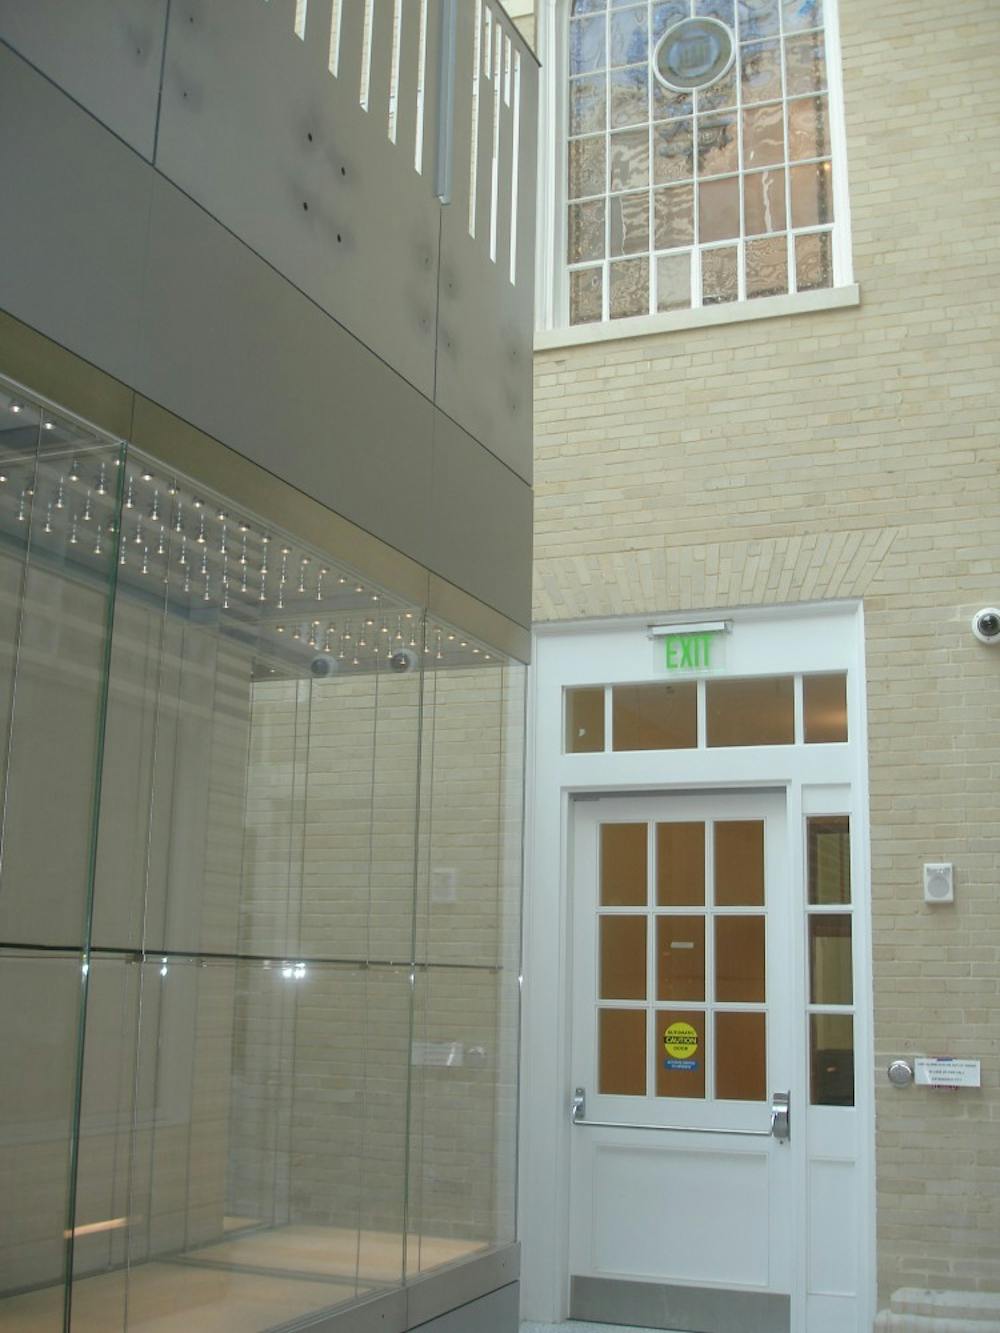 A museum housing the University's archelogical collection will sit beneath the Atrium.